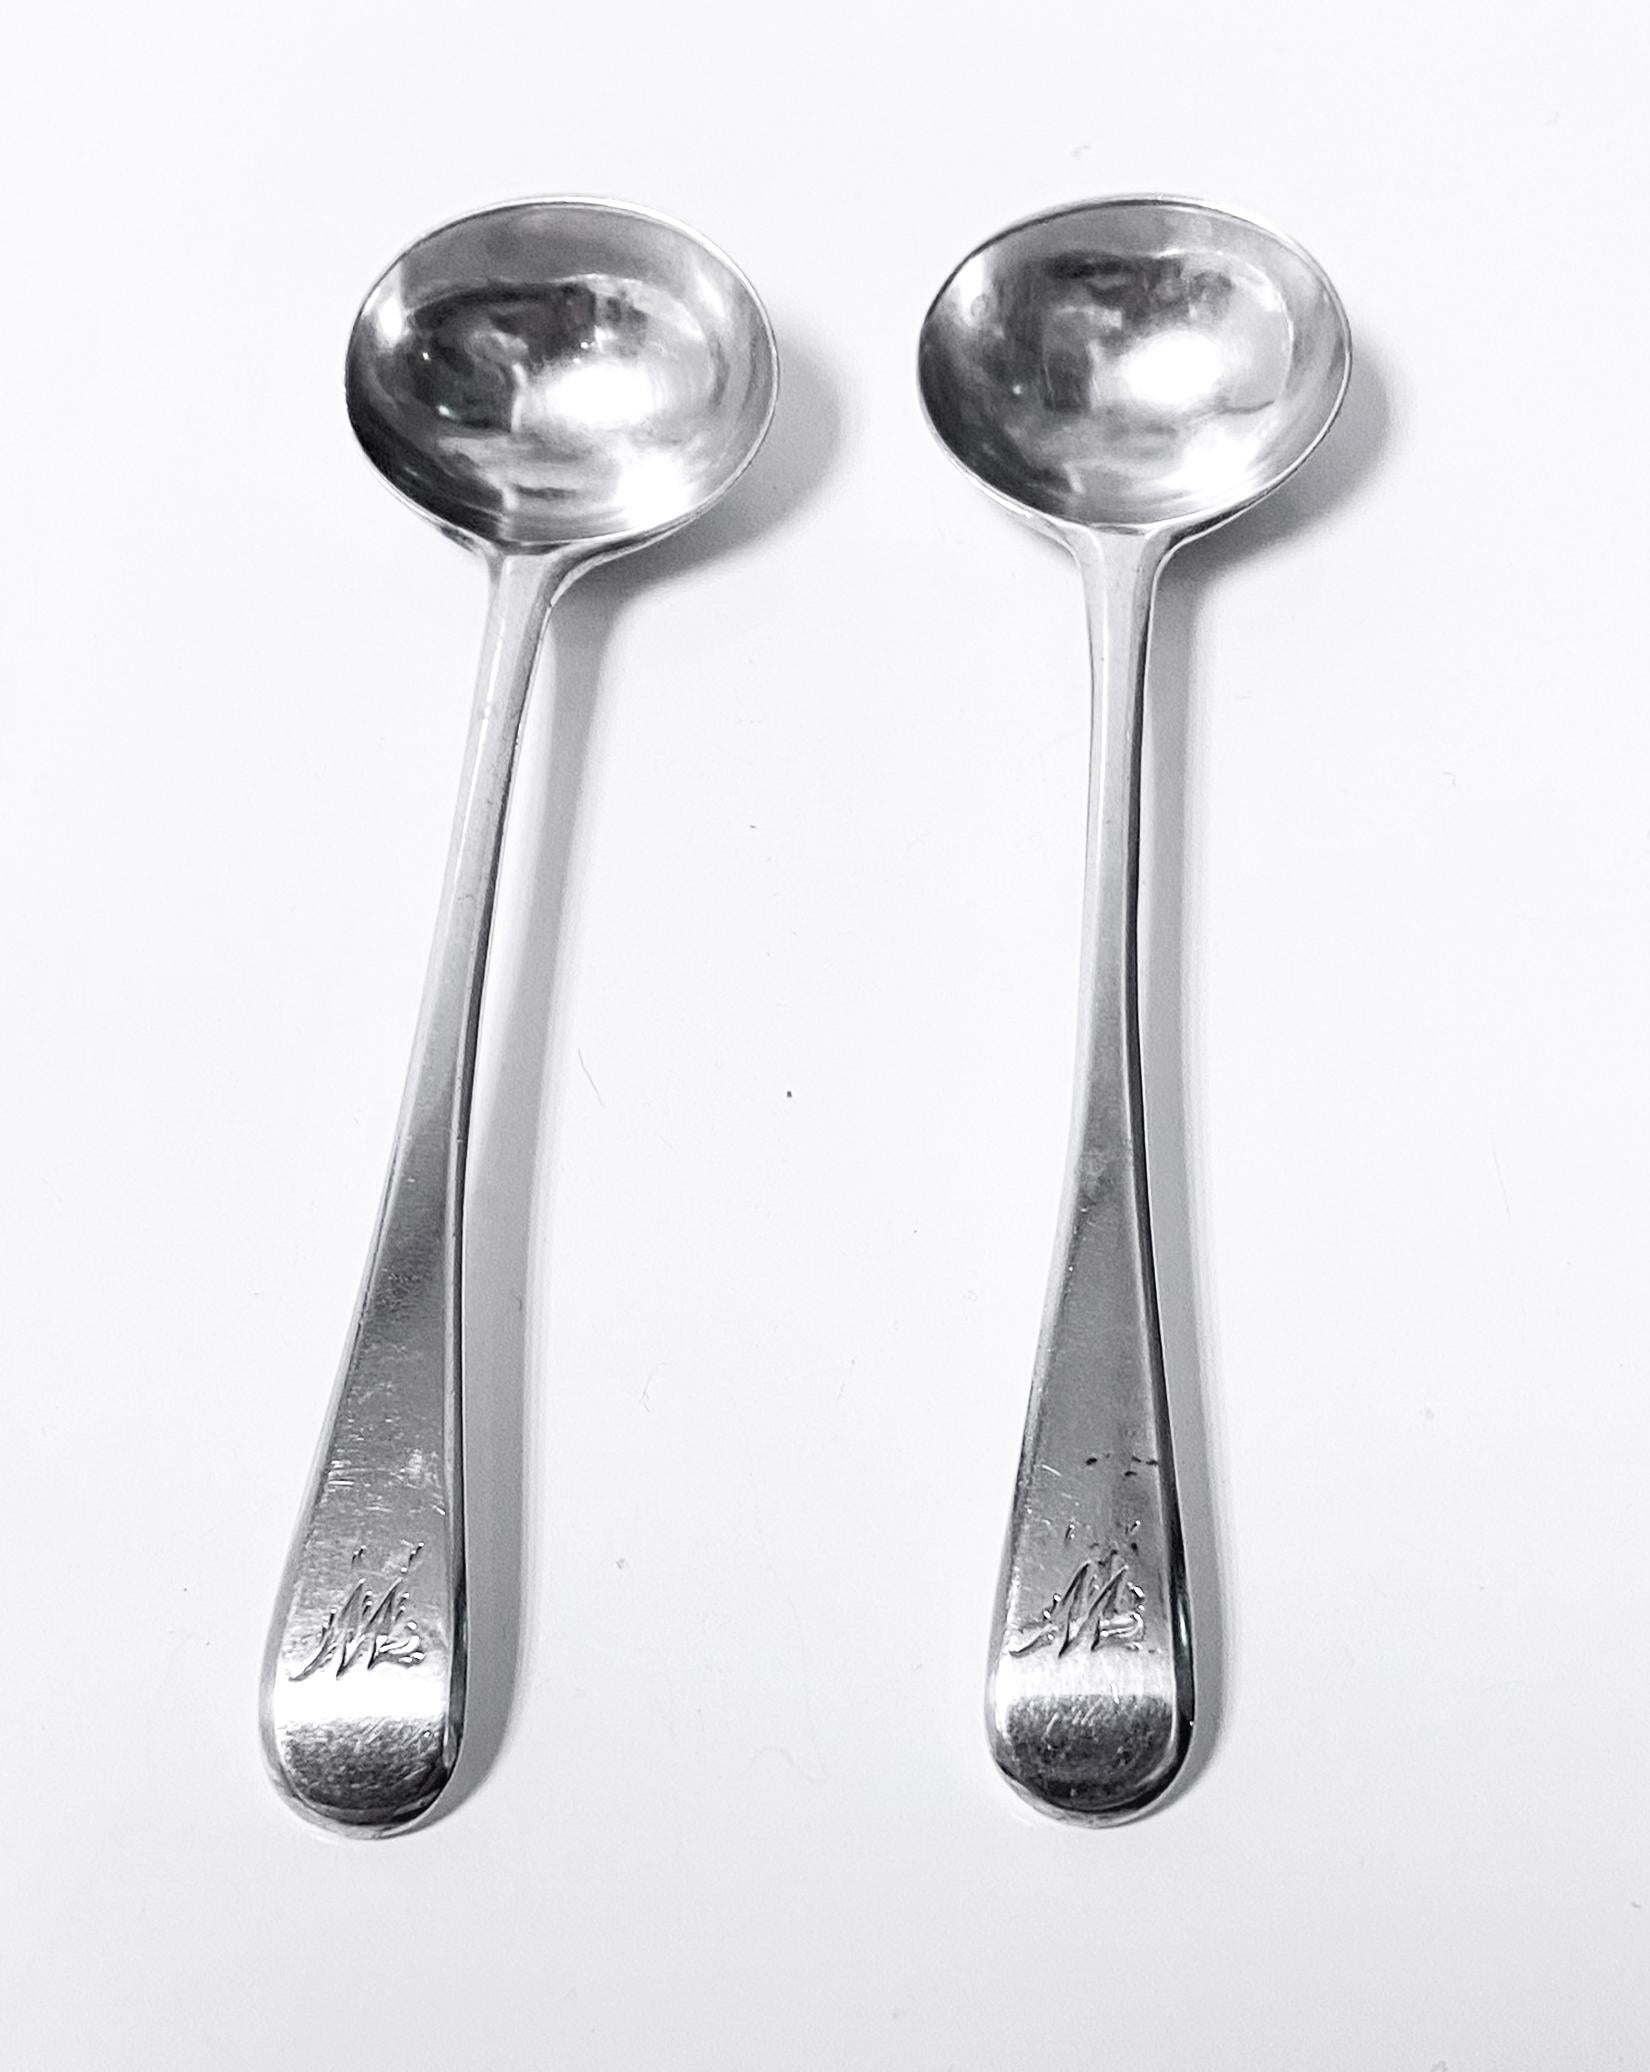 Pair of Georgian Silver Salt spoons, Peter, Ann and William Bateman, London 1804. Old English pattern, initial W. Length: 4 inches. Weight: 21 gm.